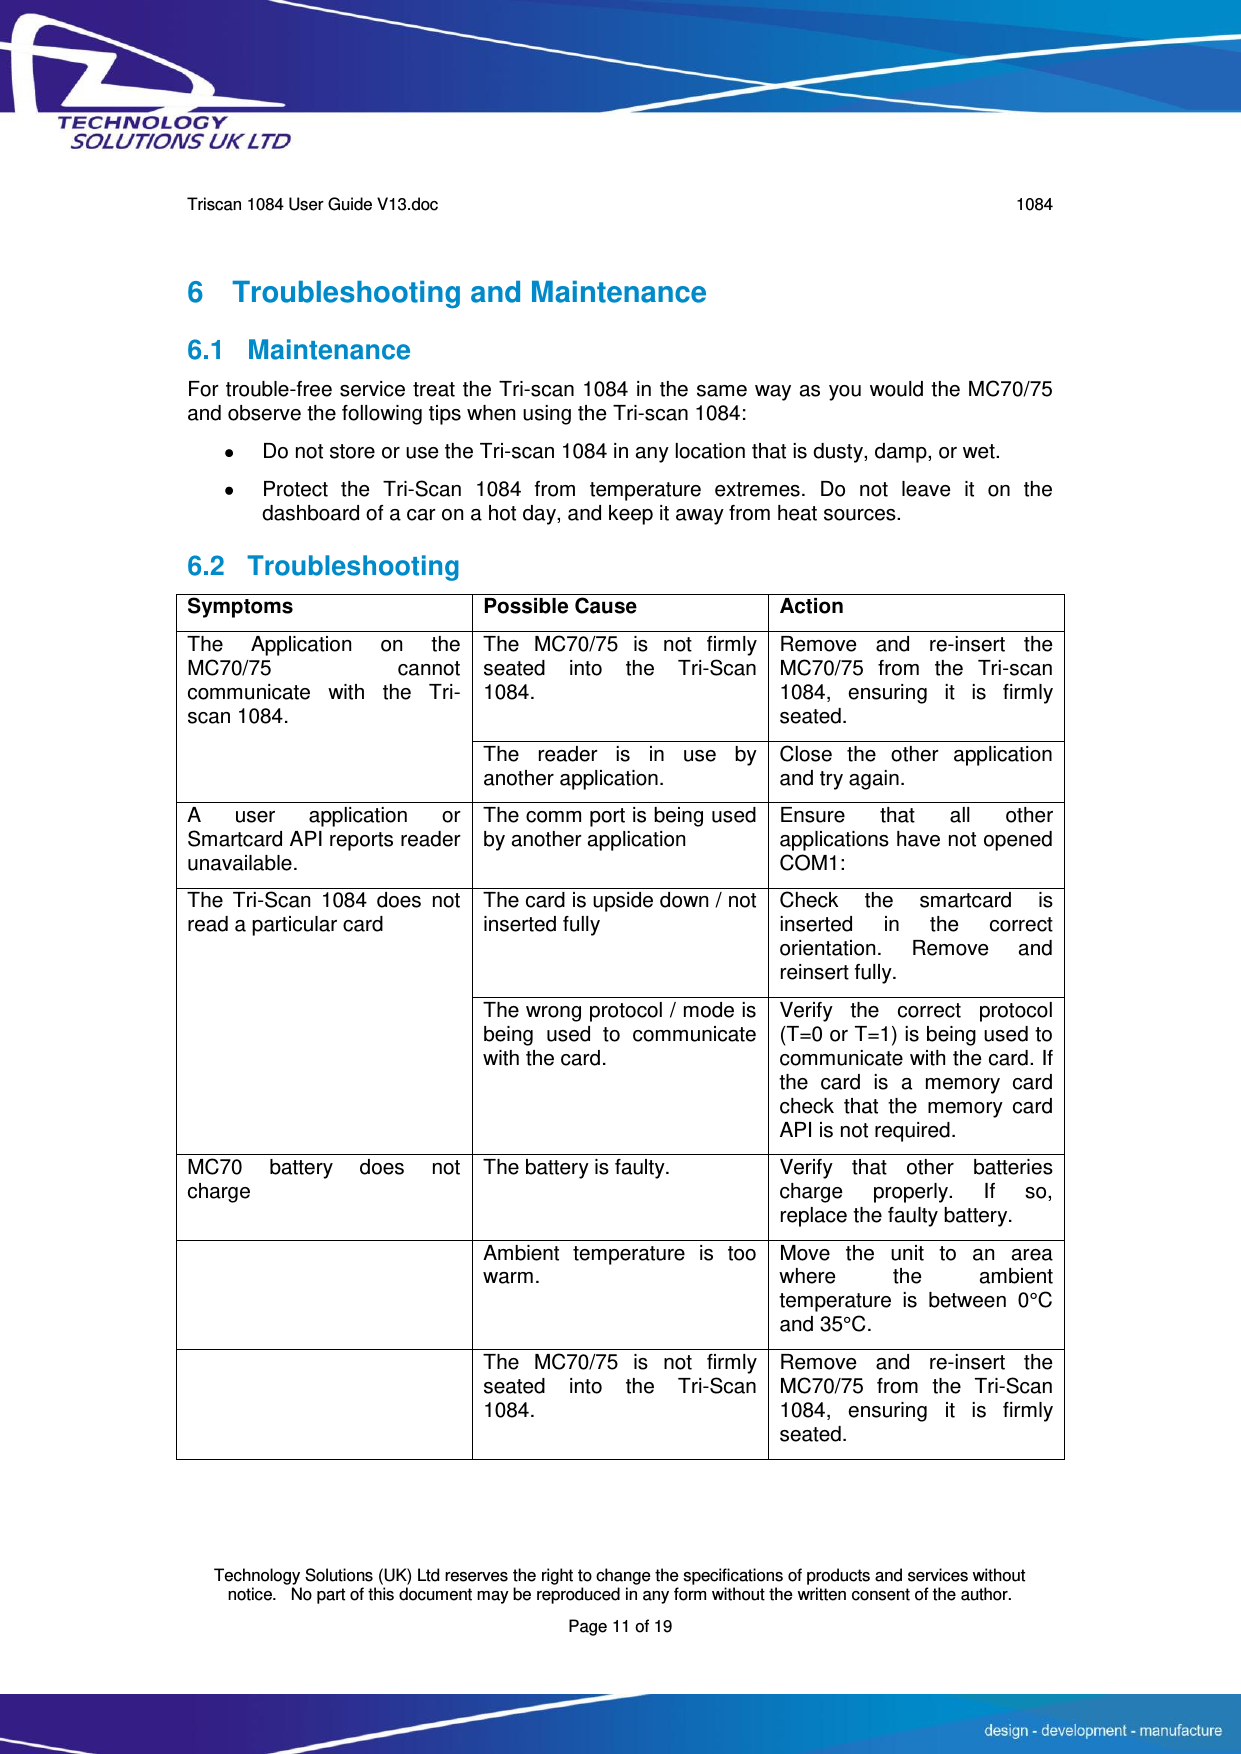      Triscan 1084 User Guide V13.doc   1084  Technology Solutions (UK) Ltd reserves the right to change the specifications of products and services without notice.   No part of this document may be reproduced in any form without the written consent of the author. Page 11 of 19 6  Troubleshooting and Maintenance 6.1  Maintenance For trouble-free service treat the Tri-scan 1084 in the same way as you would the MC70/75 and observe the following tips when using the Tri-scan 1084:   Do not store or use the Tri-scan 1084 in any location that is dusty, damp, or wet.   Protect  the  Tri-Scan  1084  from  temperature  extremes.  Do  not  leave  it  on  the dashboard of a car on a hot day, and keep it away from heat sources. 6.2 Troubleshooting Symptoms Possible Cause Action The  Application  on  the MC70/75  cannot communicate  with  the  Tri-scan 1084. The  MC70/75  is  not  firmly seated  into  the  Tri-Scan 1084. Remove  and  re-insert  the MC70/75  from  the  Tri-scan 1084,  ensuring  it  is  firmly seated. The  reader  is  in  use  by another application. Close  the  other  application and try again. A  user  application  or Smartcard API reports reader unavailable. The comm port is being used by another application Ensure  that  all  other applications have not opened COM1: The  Tri-Scan  1084  does  not read a particular card The card is upside down / not inserted fully Check  the  smartcard  is inserted  in  the  correct orientation.  Remove  and reinsert fully. The wrong protocol / mode is being  used  to  communicate with the card. Verify  the  correct  protocol (T=0 or T=1) is being used to communicate with the card. If the  card  is  a  memory  card check  that  the  memory  card API is not required. MC70  battery  does  not charge The battery is faulty. Verify  that  other  batteries charge  properly.  If  so, replace the faulty battery.  Ambient  temperature  is  too warm. Move  the  unit  to  an  area where  the  ambient temperature  is  between  0°C and 35°C.  The  MC70/75  is  not  firmly seated  into  the  Tri-Scan 1084. Remove  and  re-insert  the MC70/75  from  the  Tri-Scan 1084,  ensuring  it  is  firmly seated. 